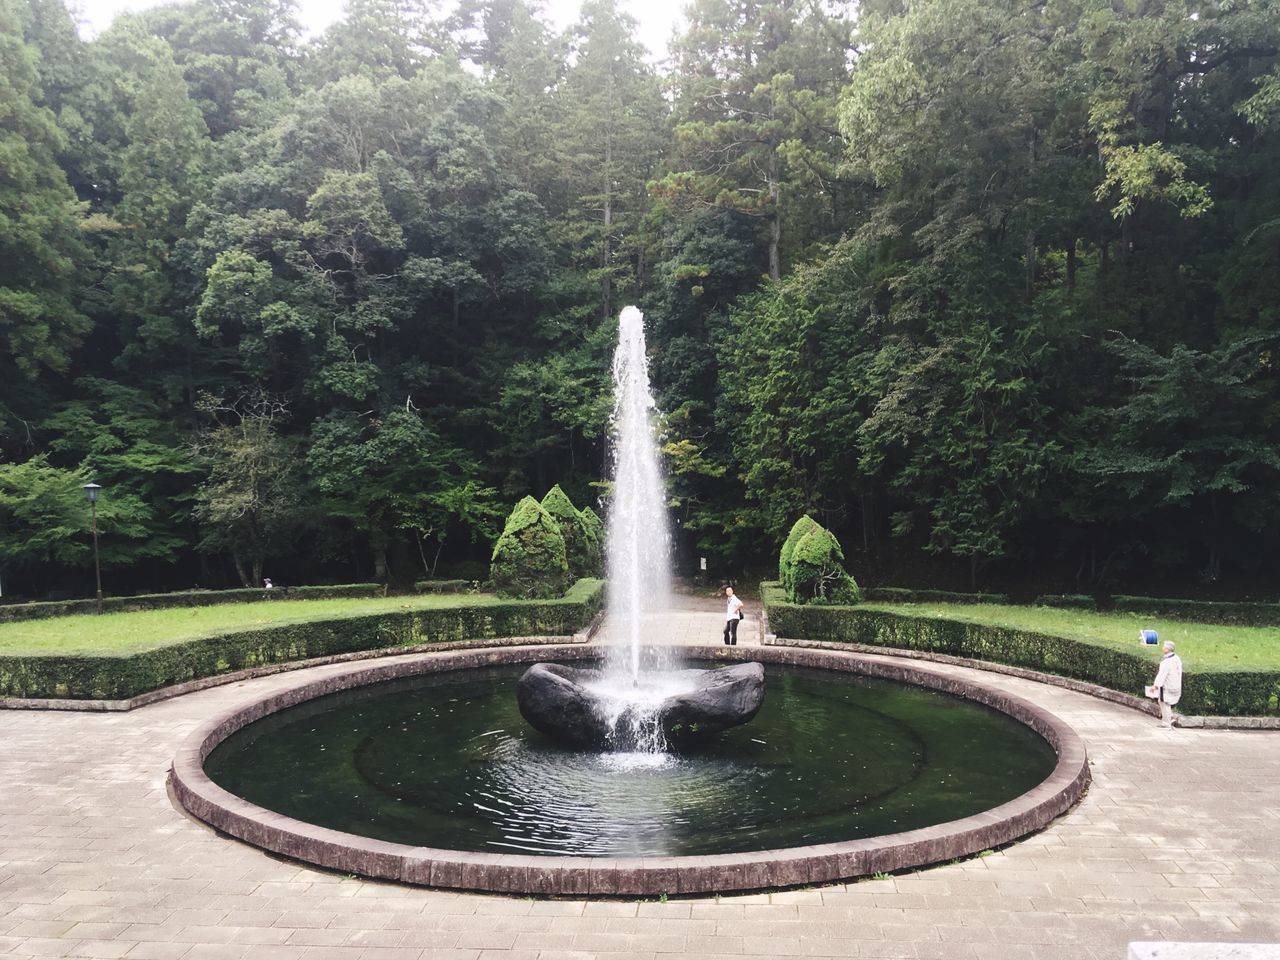 FOUNTAIN IN PARK AGAINST TREES